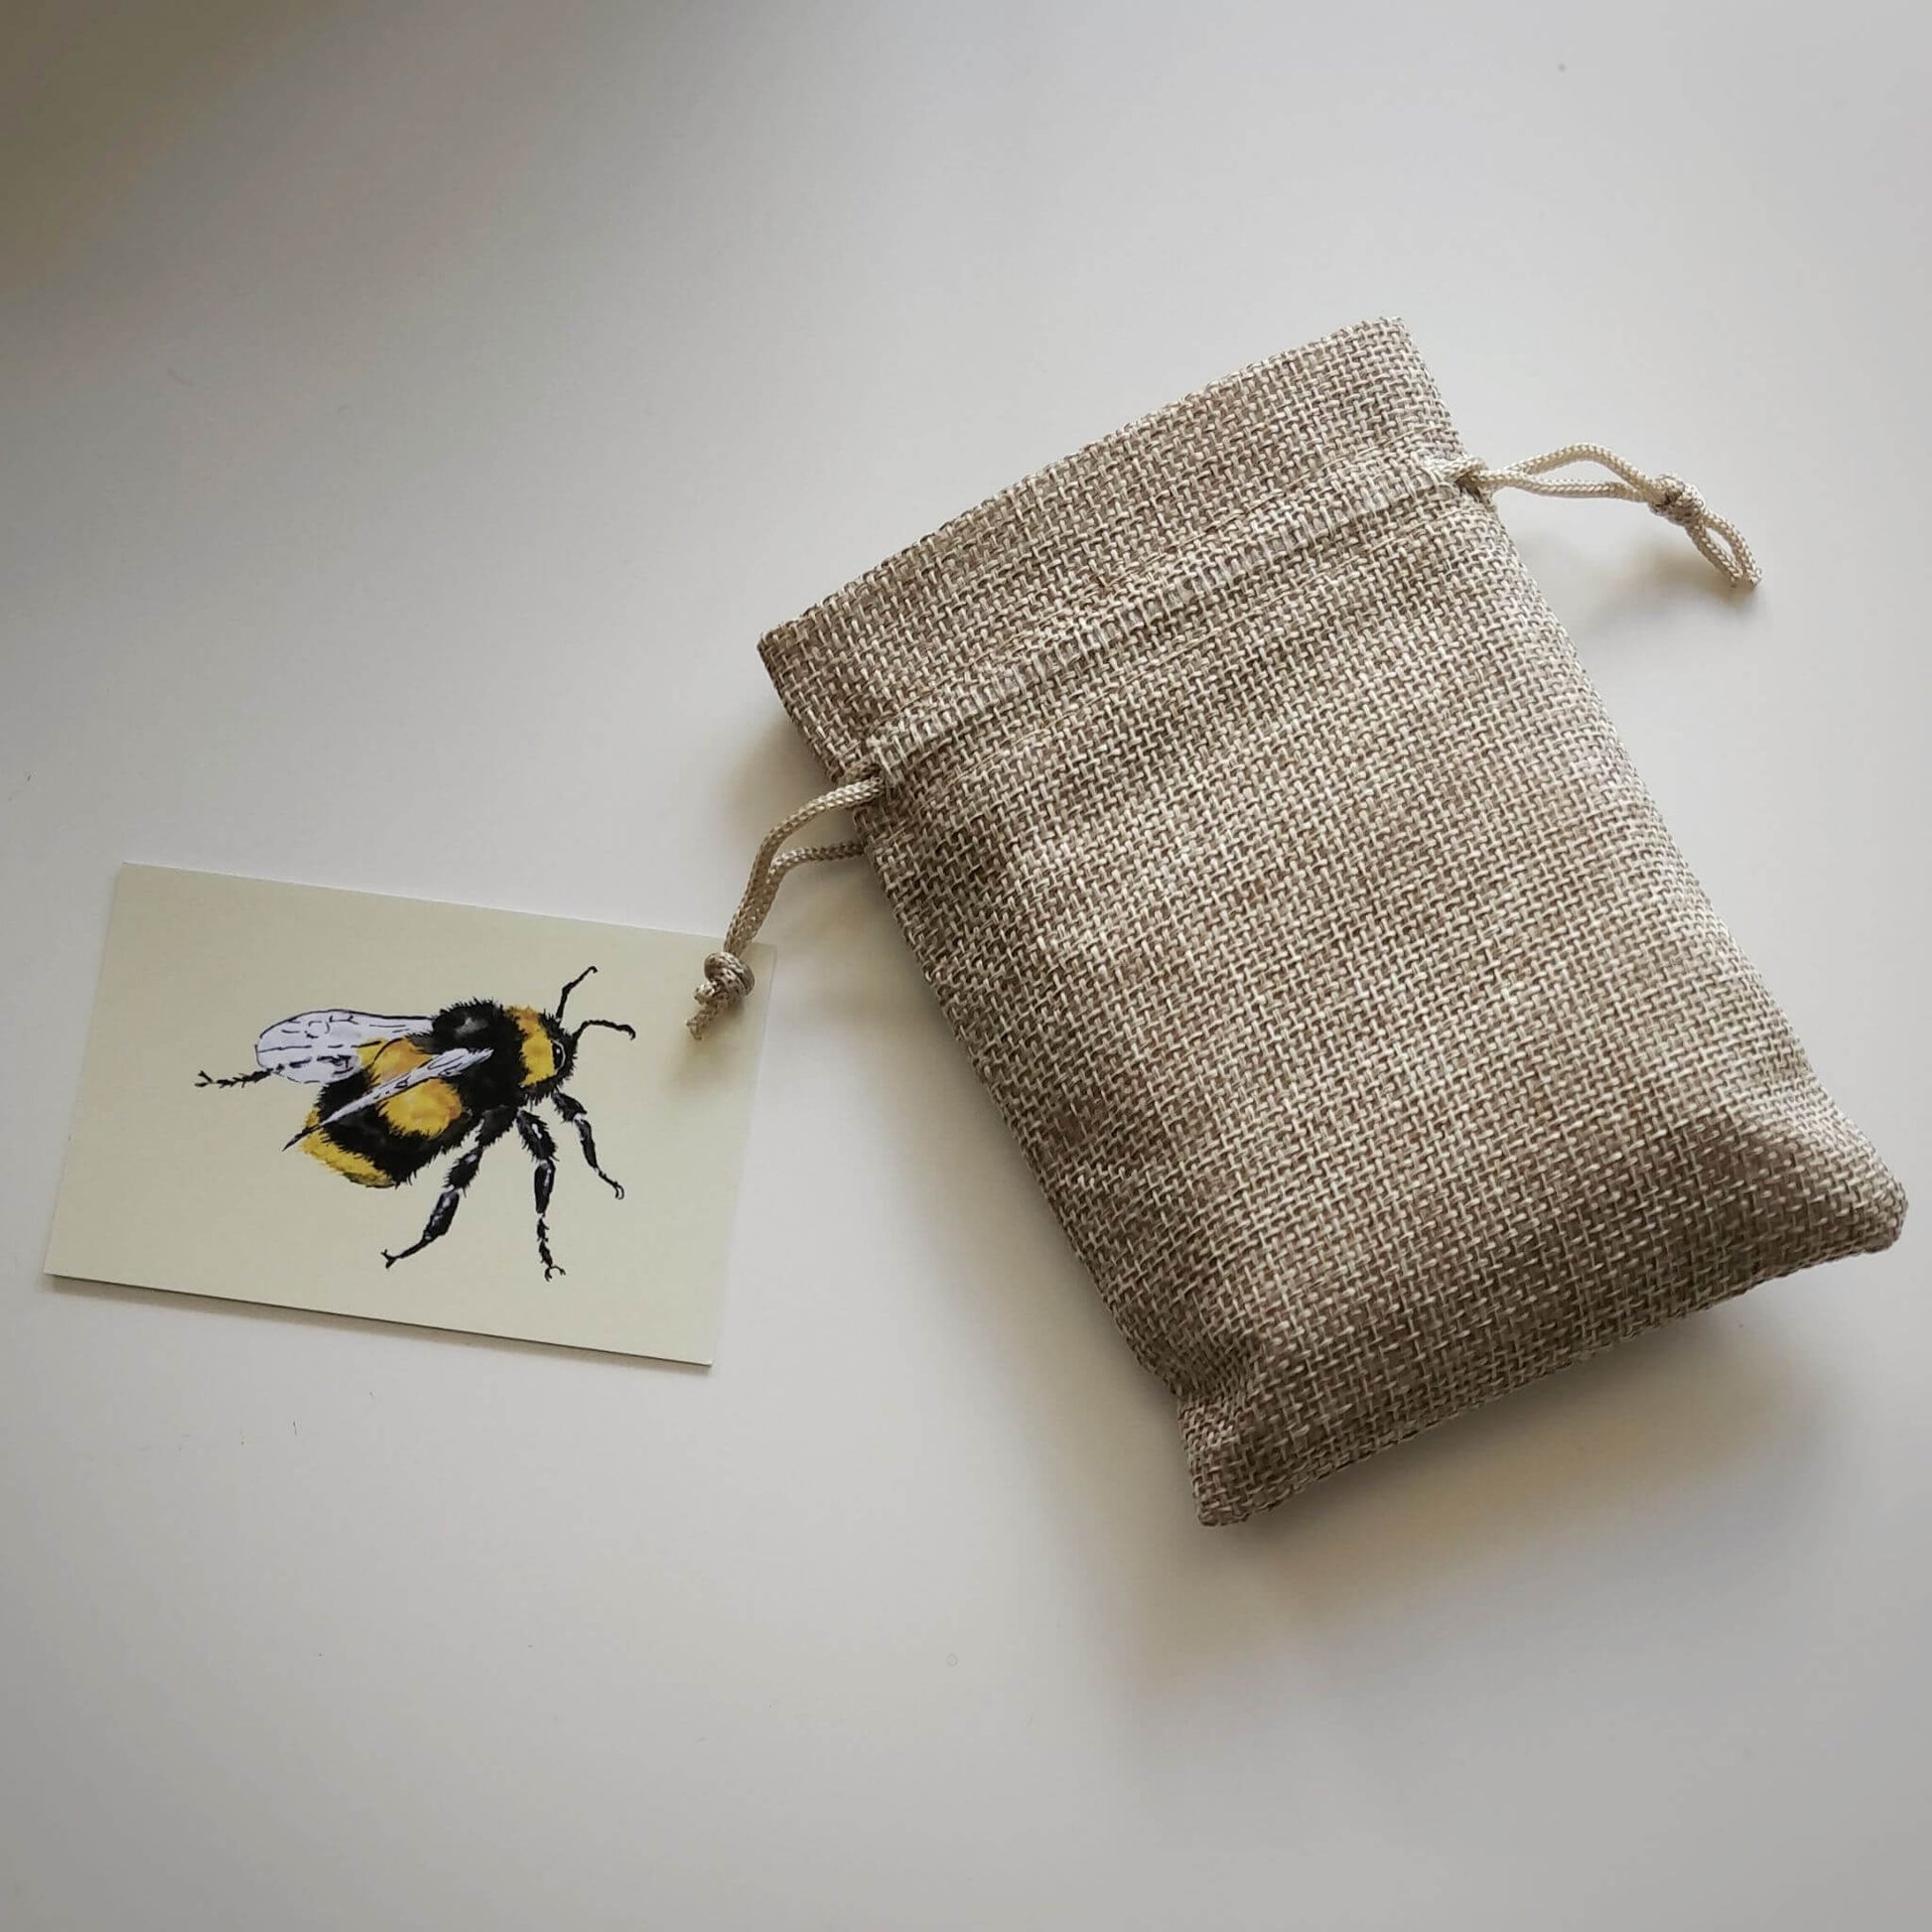 Wildflower Seed Gift Set - jute bag containing wildlfower seed packets and bee gift tag